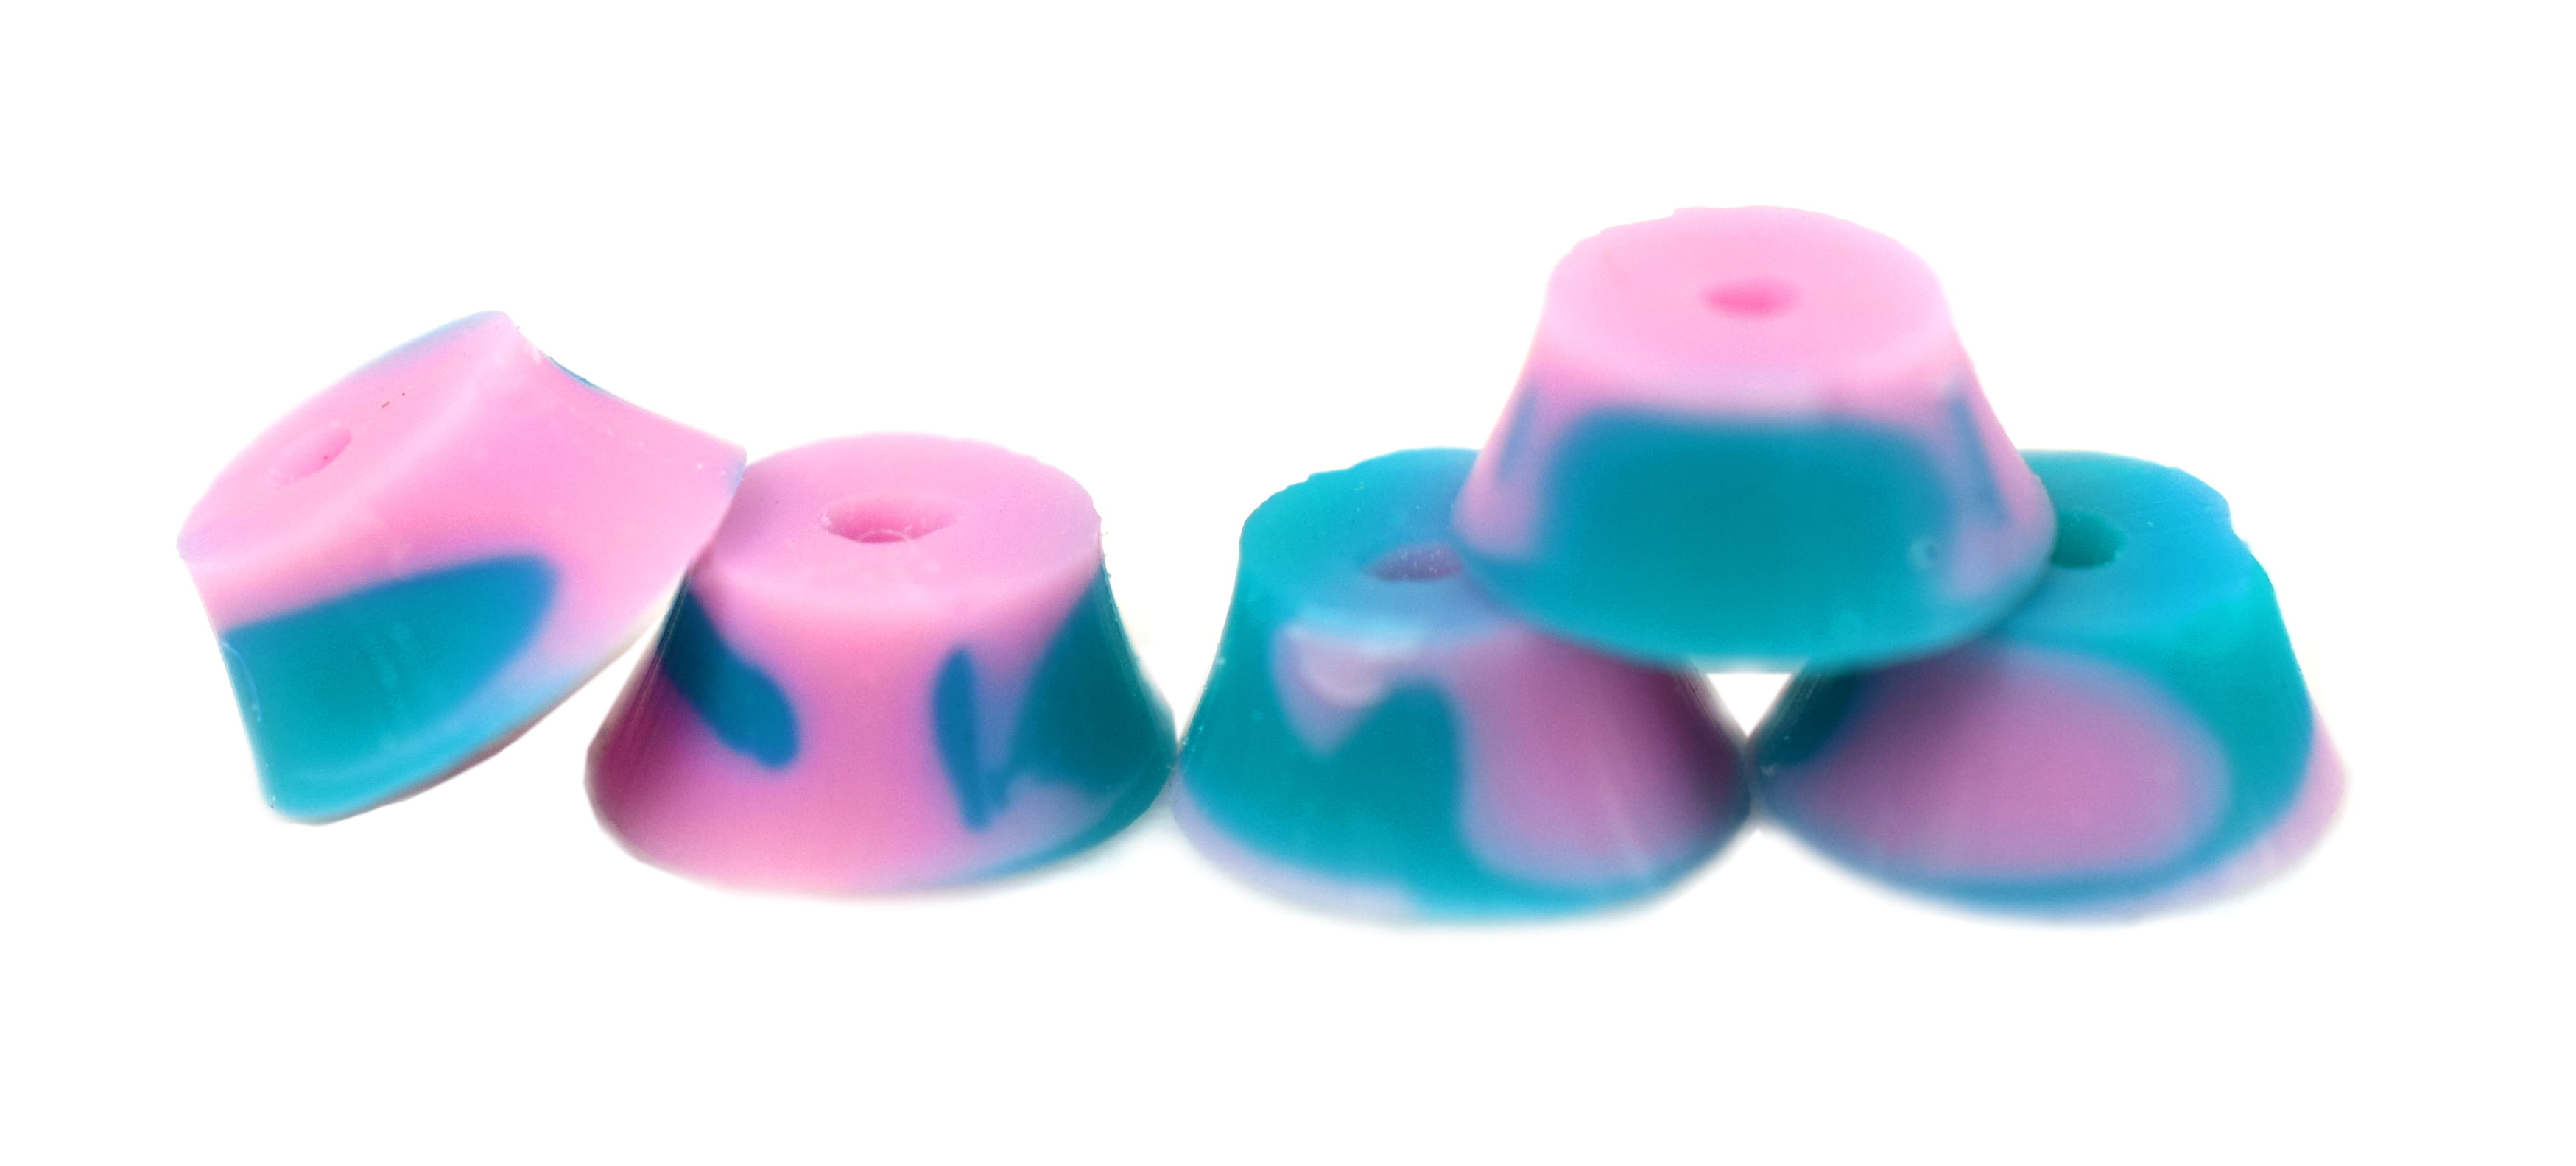 Teak Tuning Bubble Bushings Pro Duro Series in Teal and White Swirl Loose - Custom Molded Fingerboard Tuning 61A